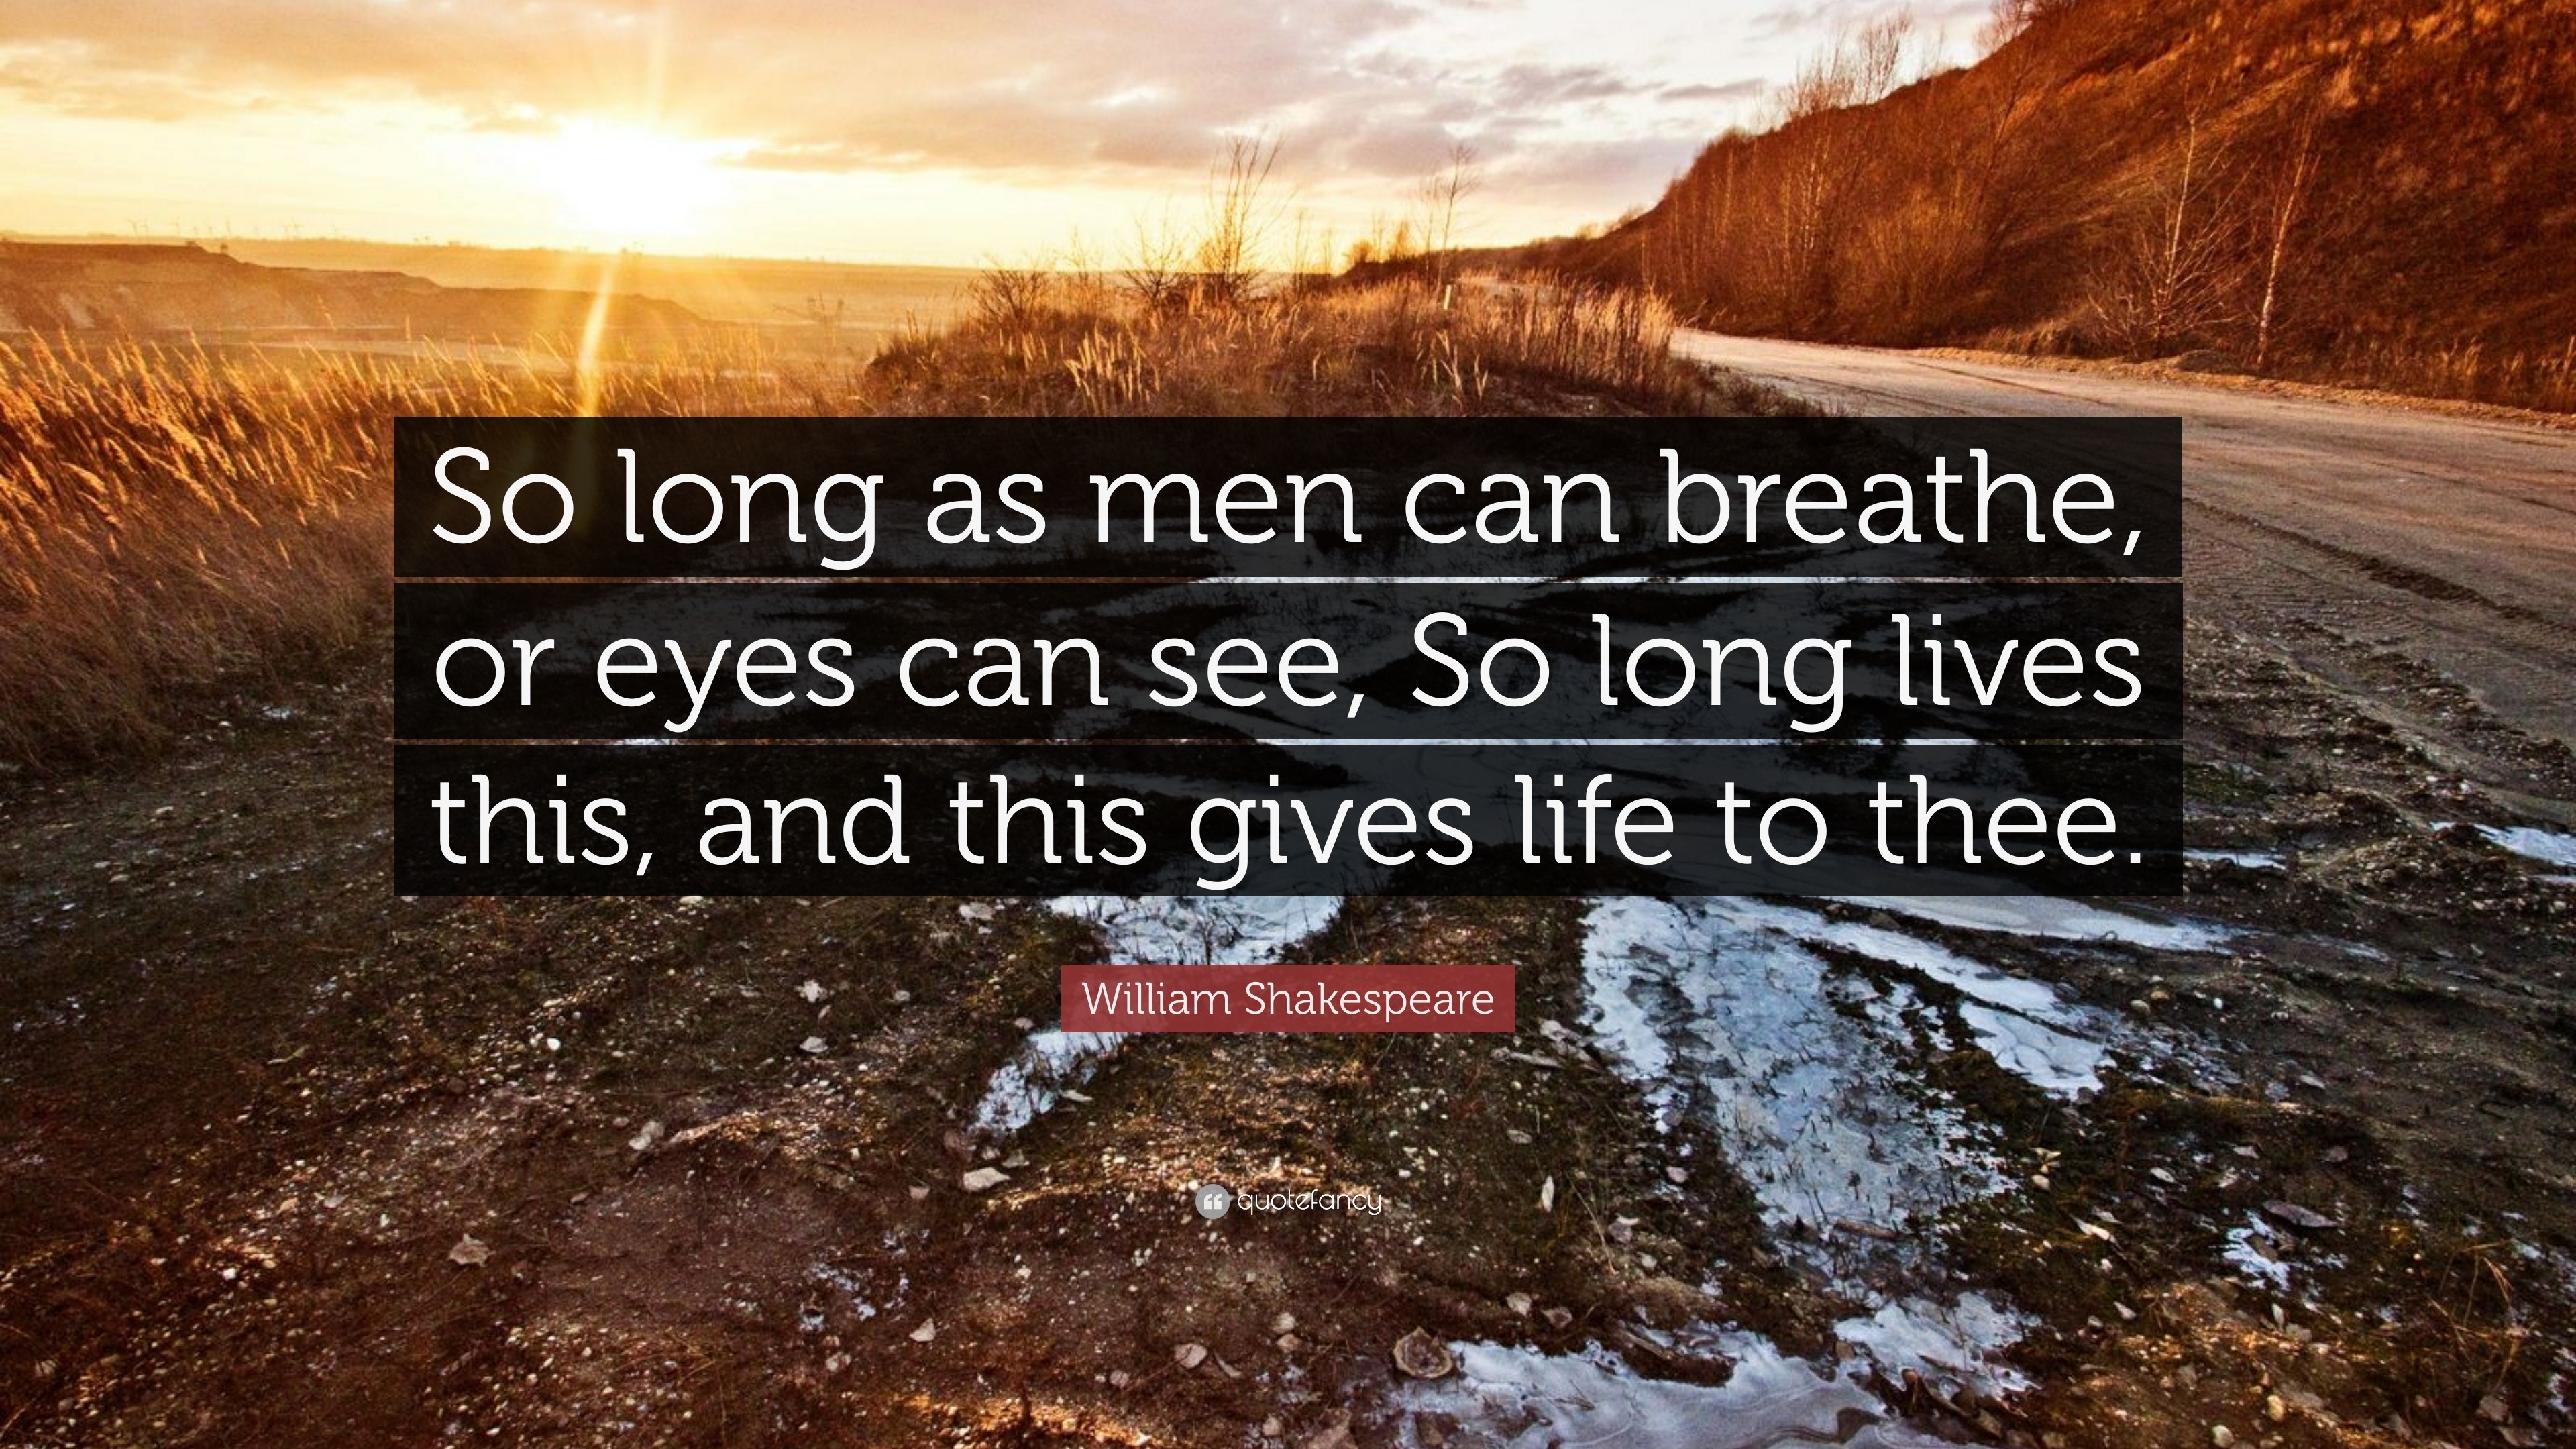 william shakespeare quotes on life william shakespeare quote u201cso long as men can breathe or eyes